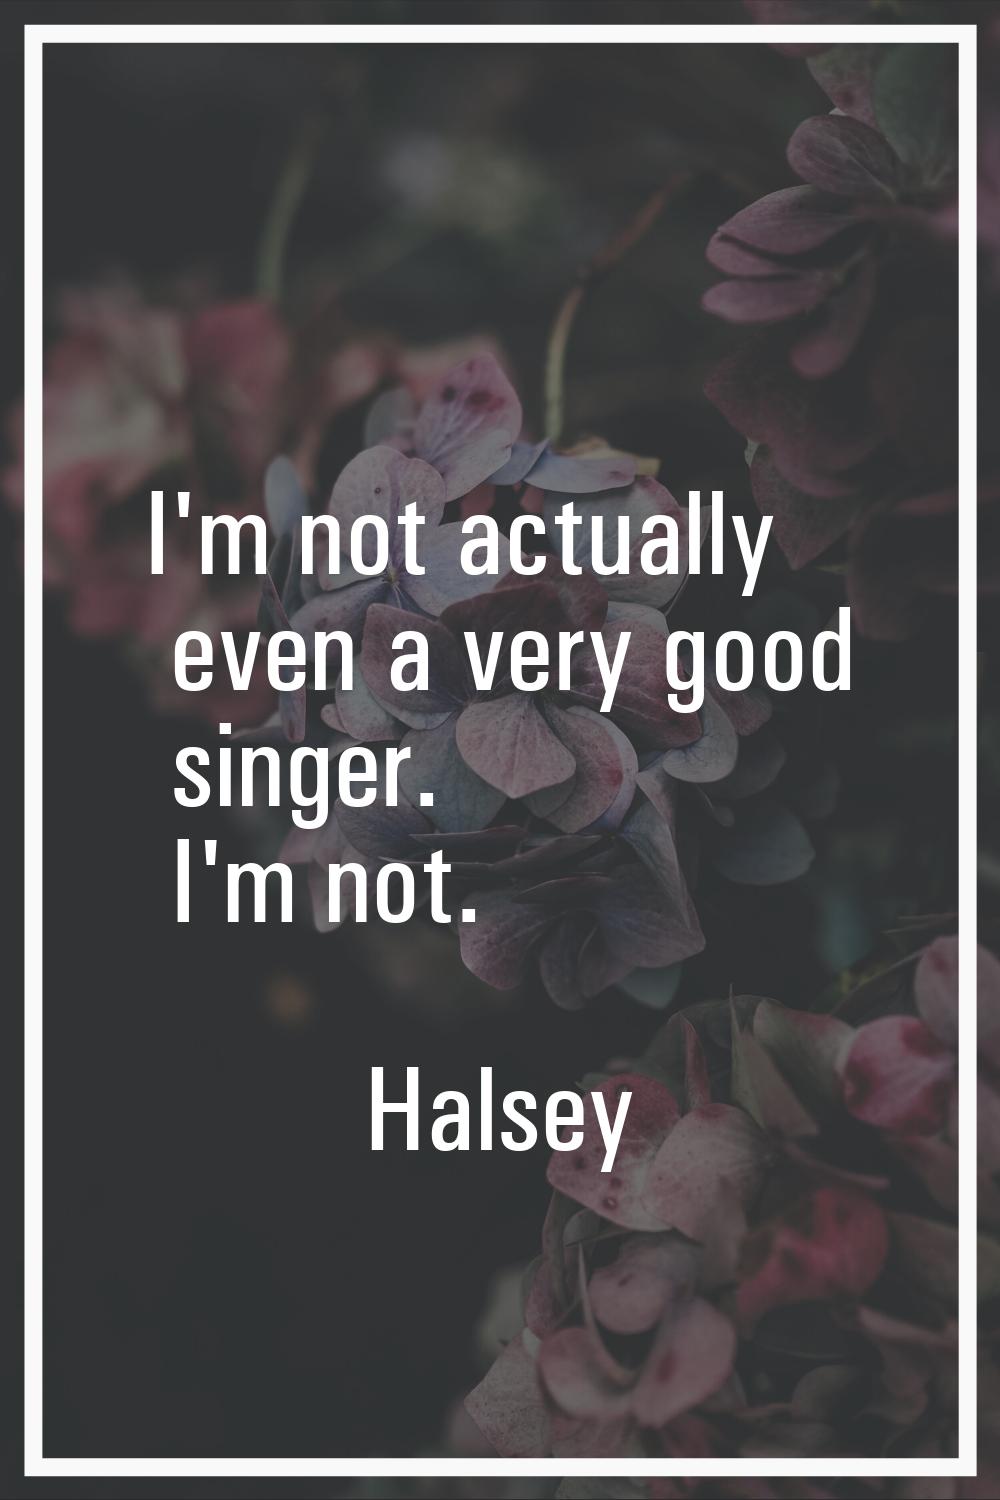 I'm not actually even a very good singer. I'm not.